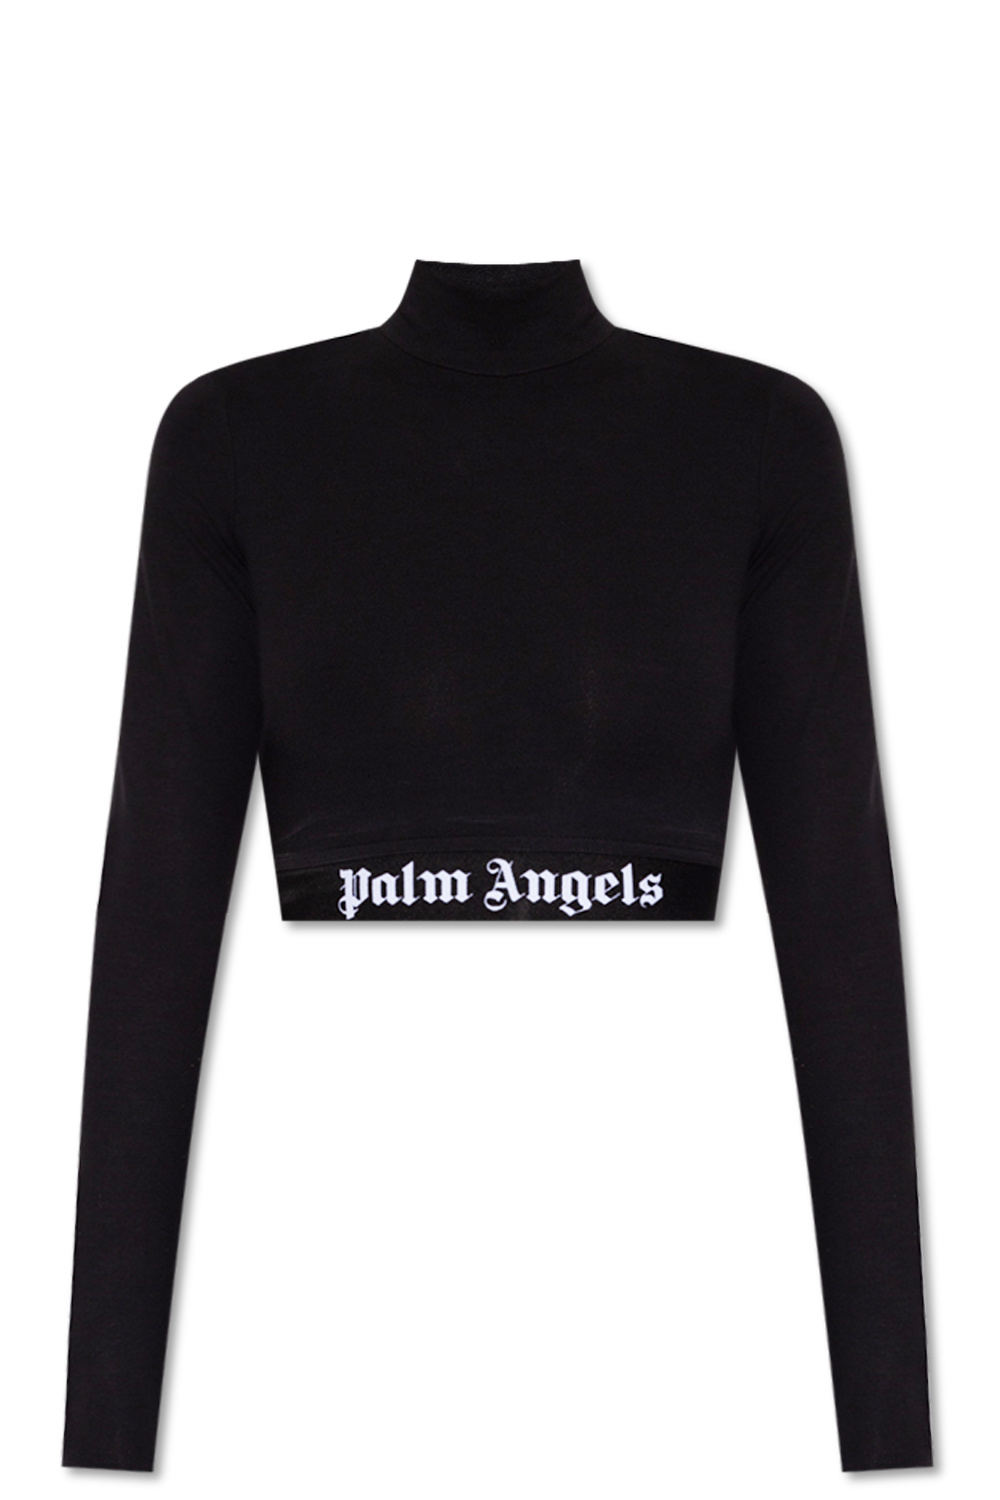 Palm Angels Crop top with logo | Women's Clothing | Vitkac